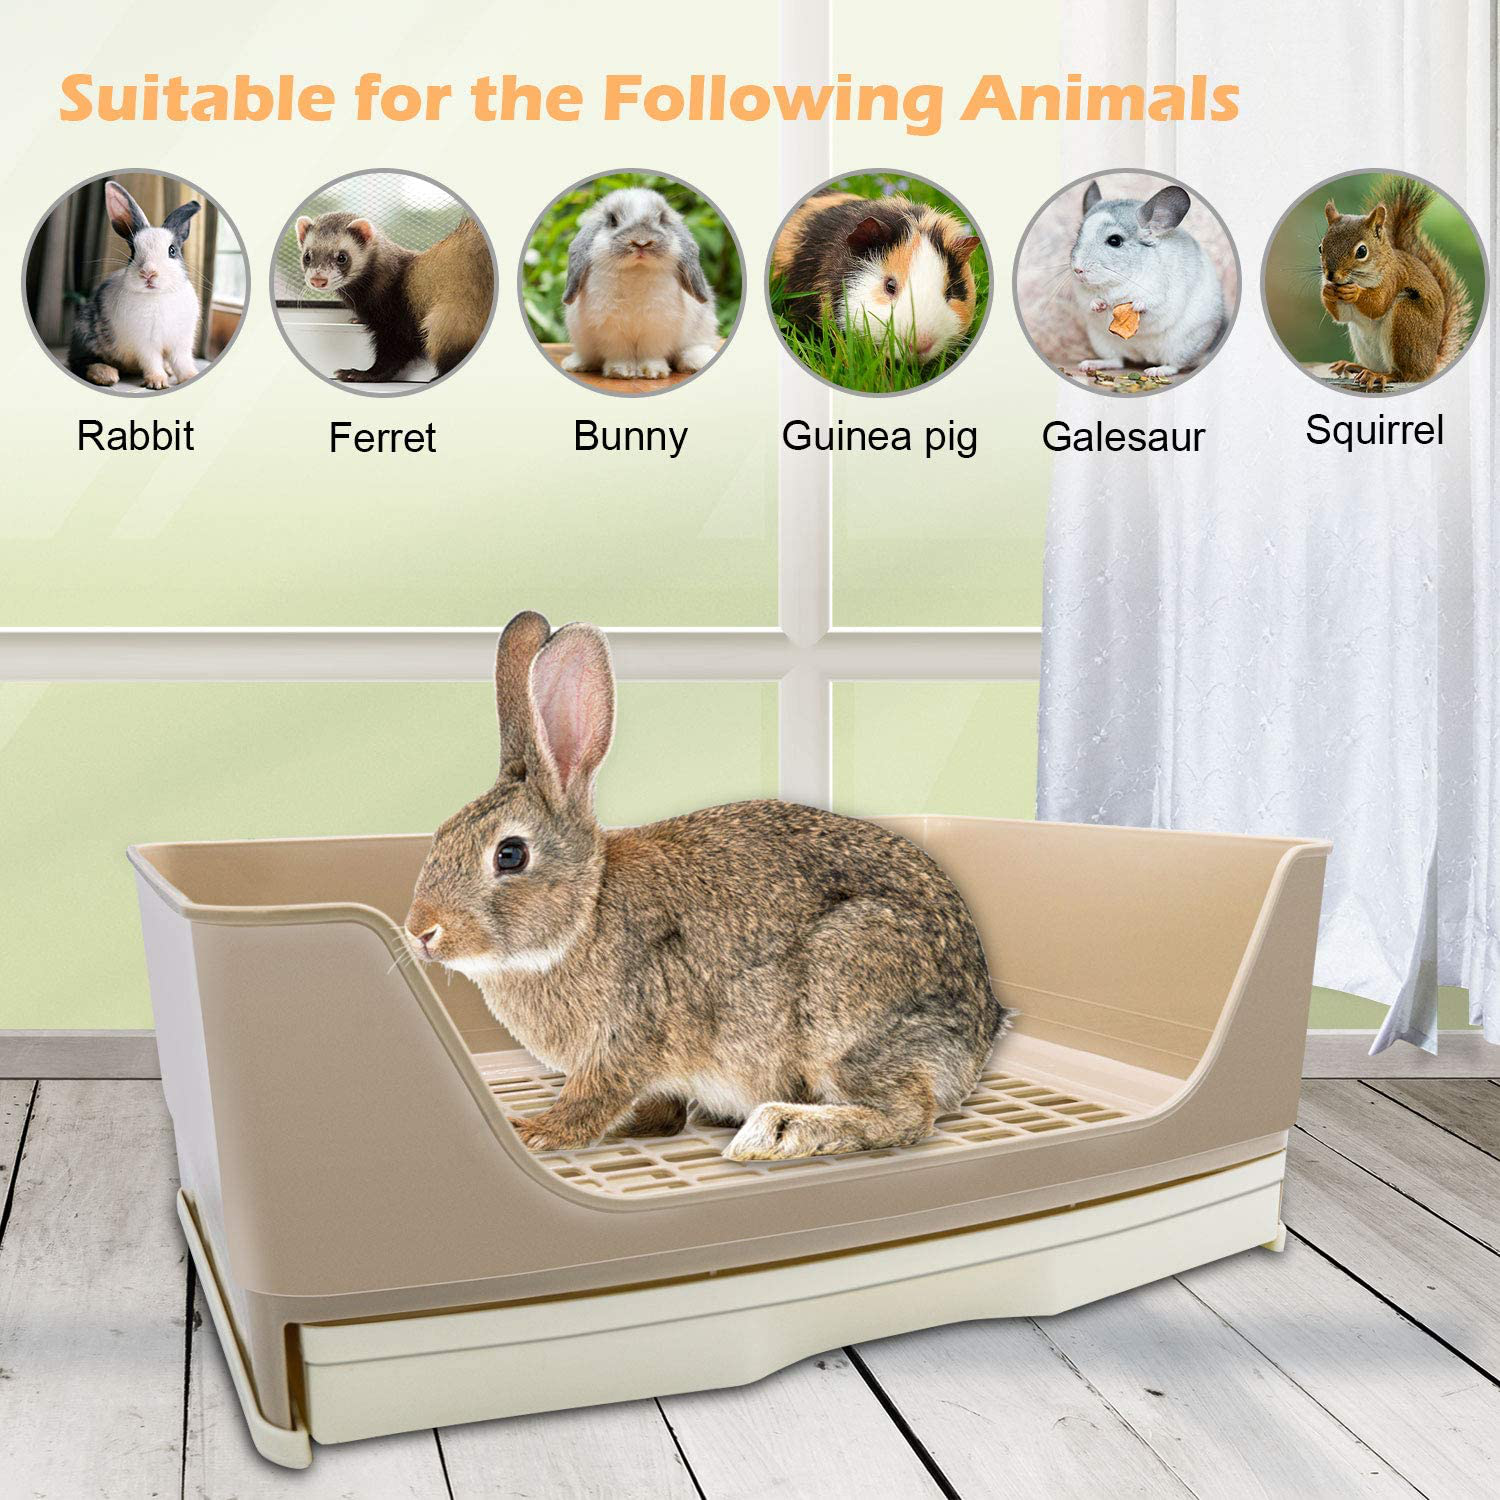 BWOGUE Large Rabbit Litter Box Toilet,Potty Trainer Corner Litter Bedding Box with Drawer Larger Pet Pan for Adult Guinea Pigs, Rabbits, Hamster, Chinchilla, Ferret, Galesaur, Small Animals